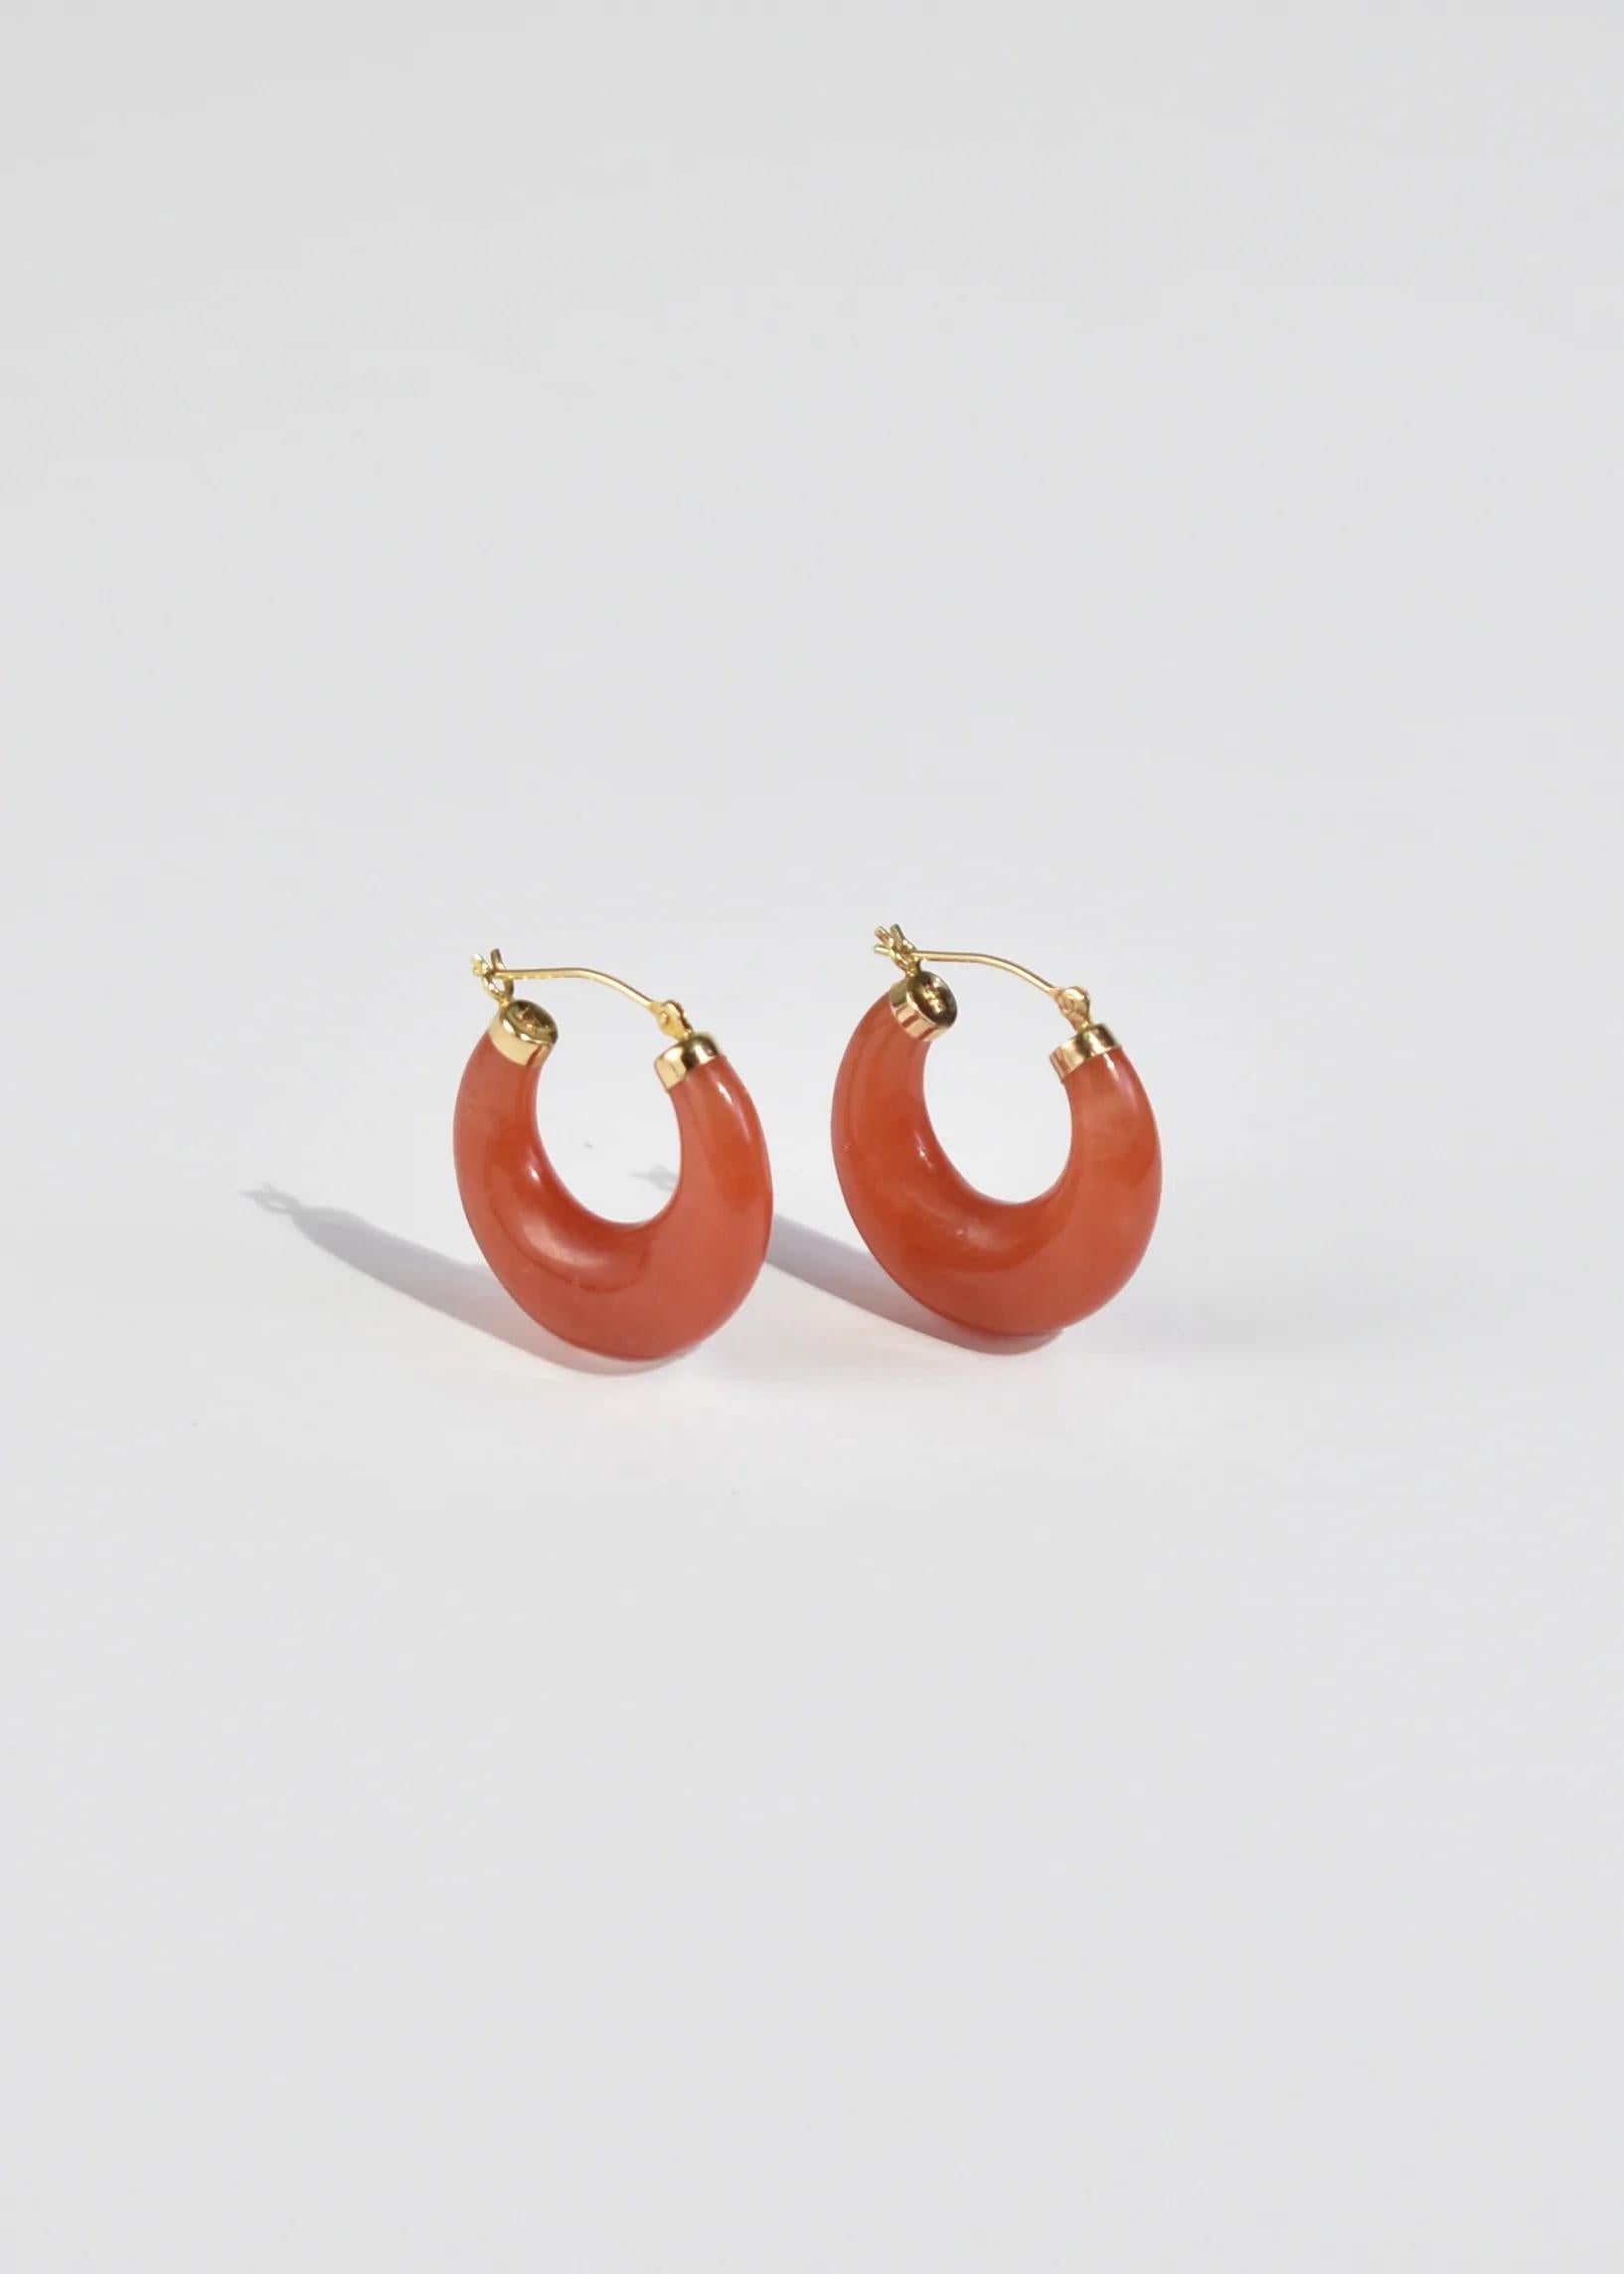 Stunning carved red jade hoop earrings with gold detail, pierced. Stamped 14k.

Material: 14k gold, jade.

We recommend storing in a dry place and periodic polishing with a cloth.